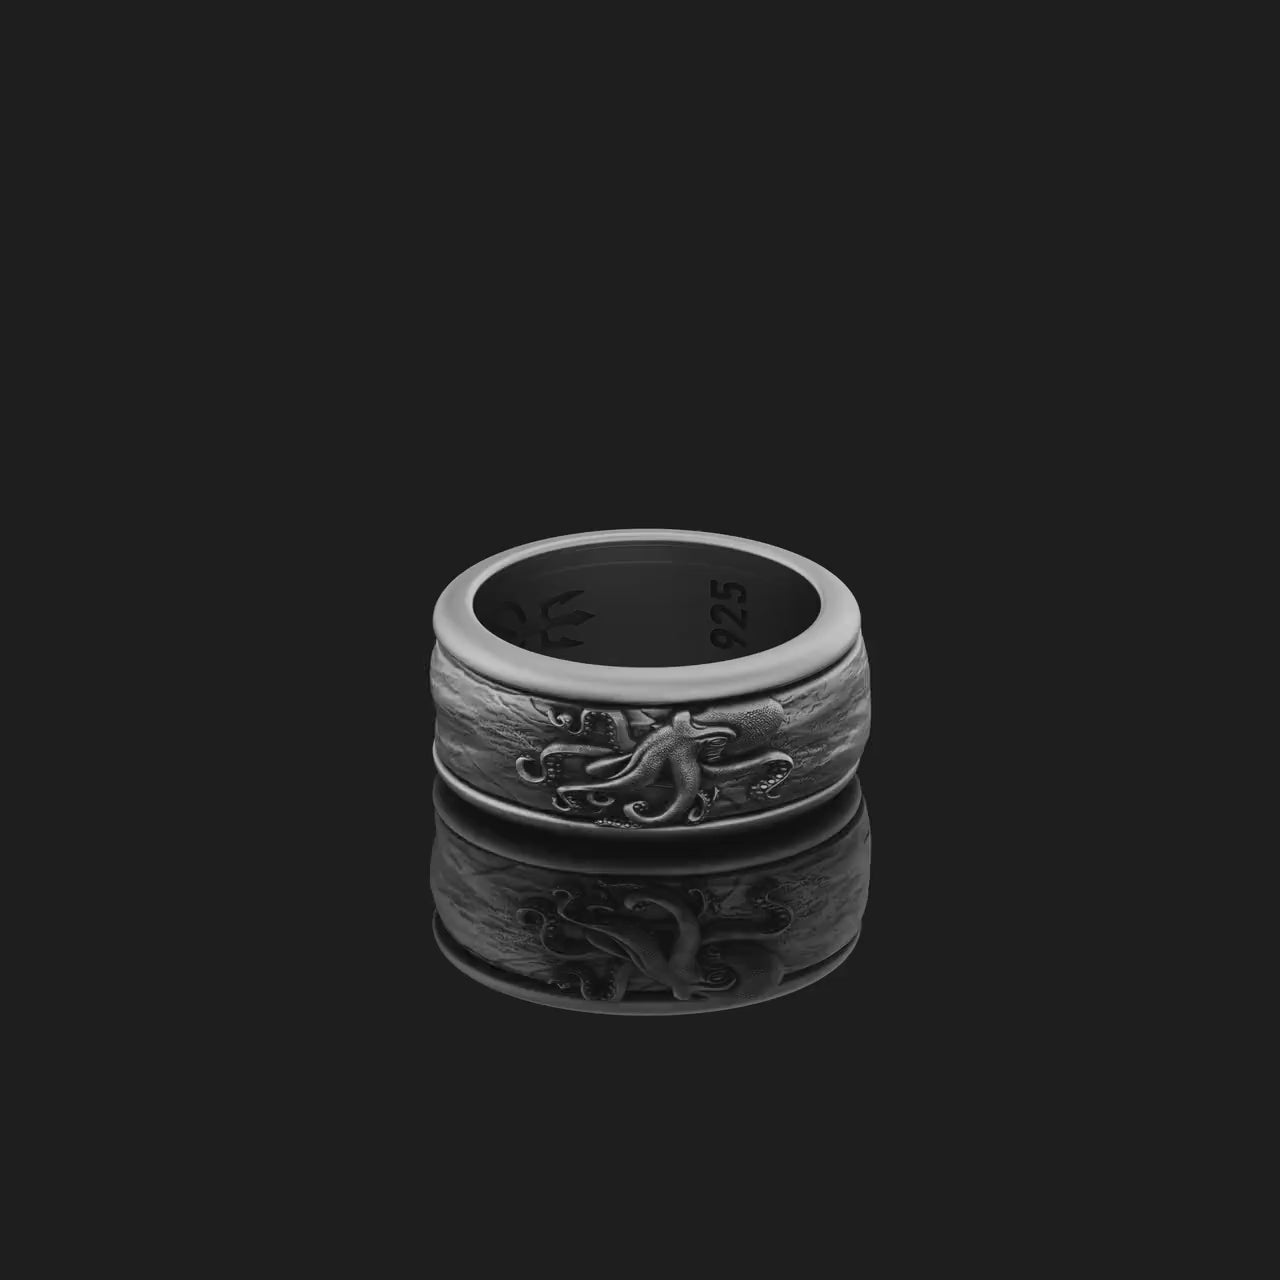 Rotating Octopus Ring, Spinning Squid Wedding Band, Unique Marine-Inspired Design, Symbol of Flexibility & Mystery